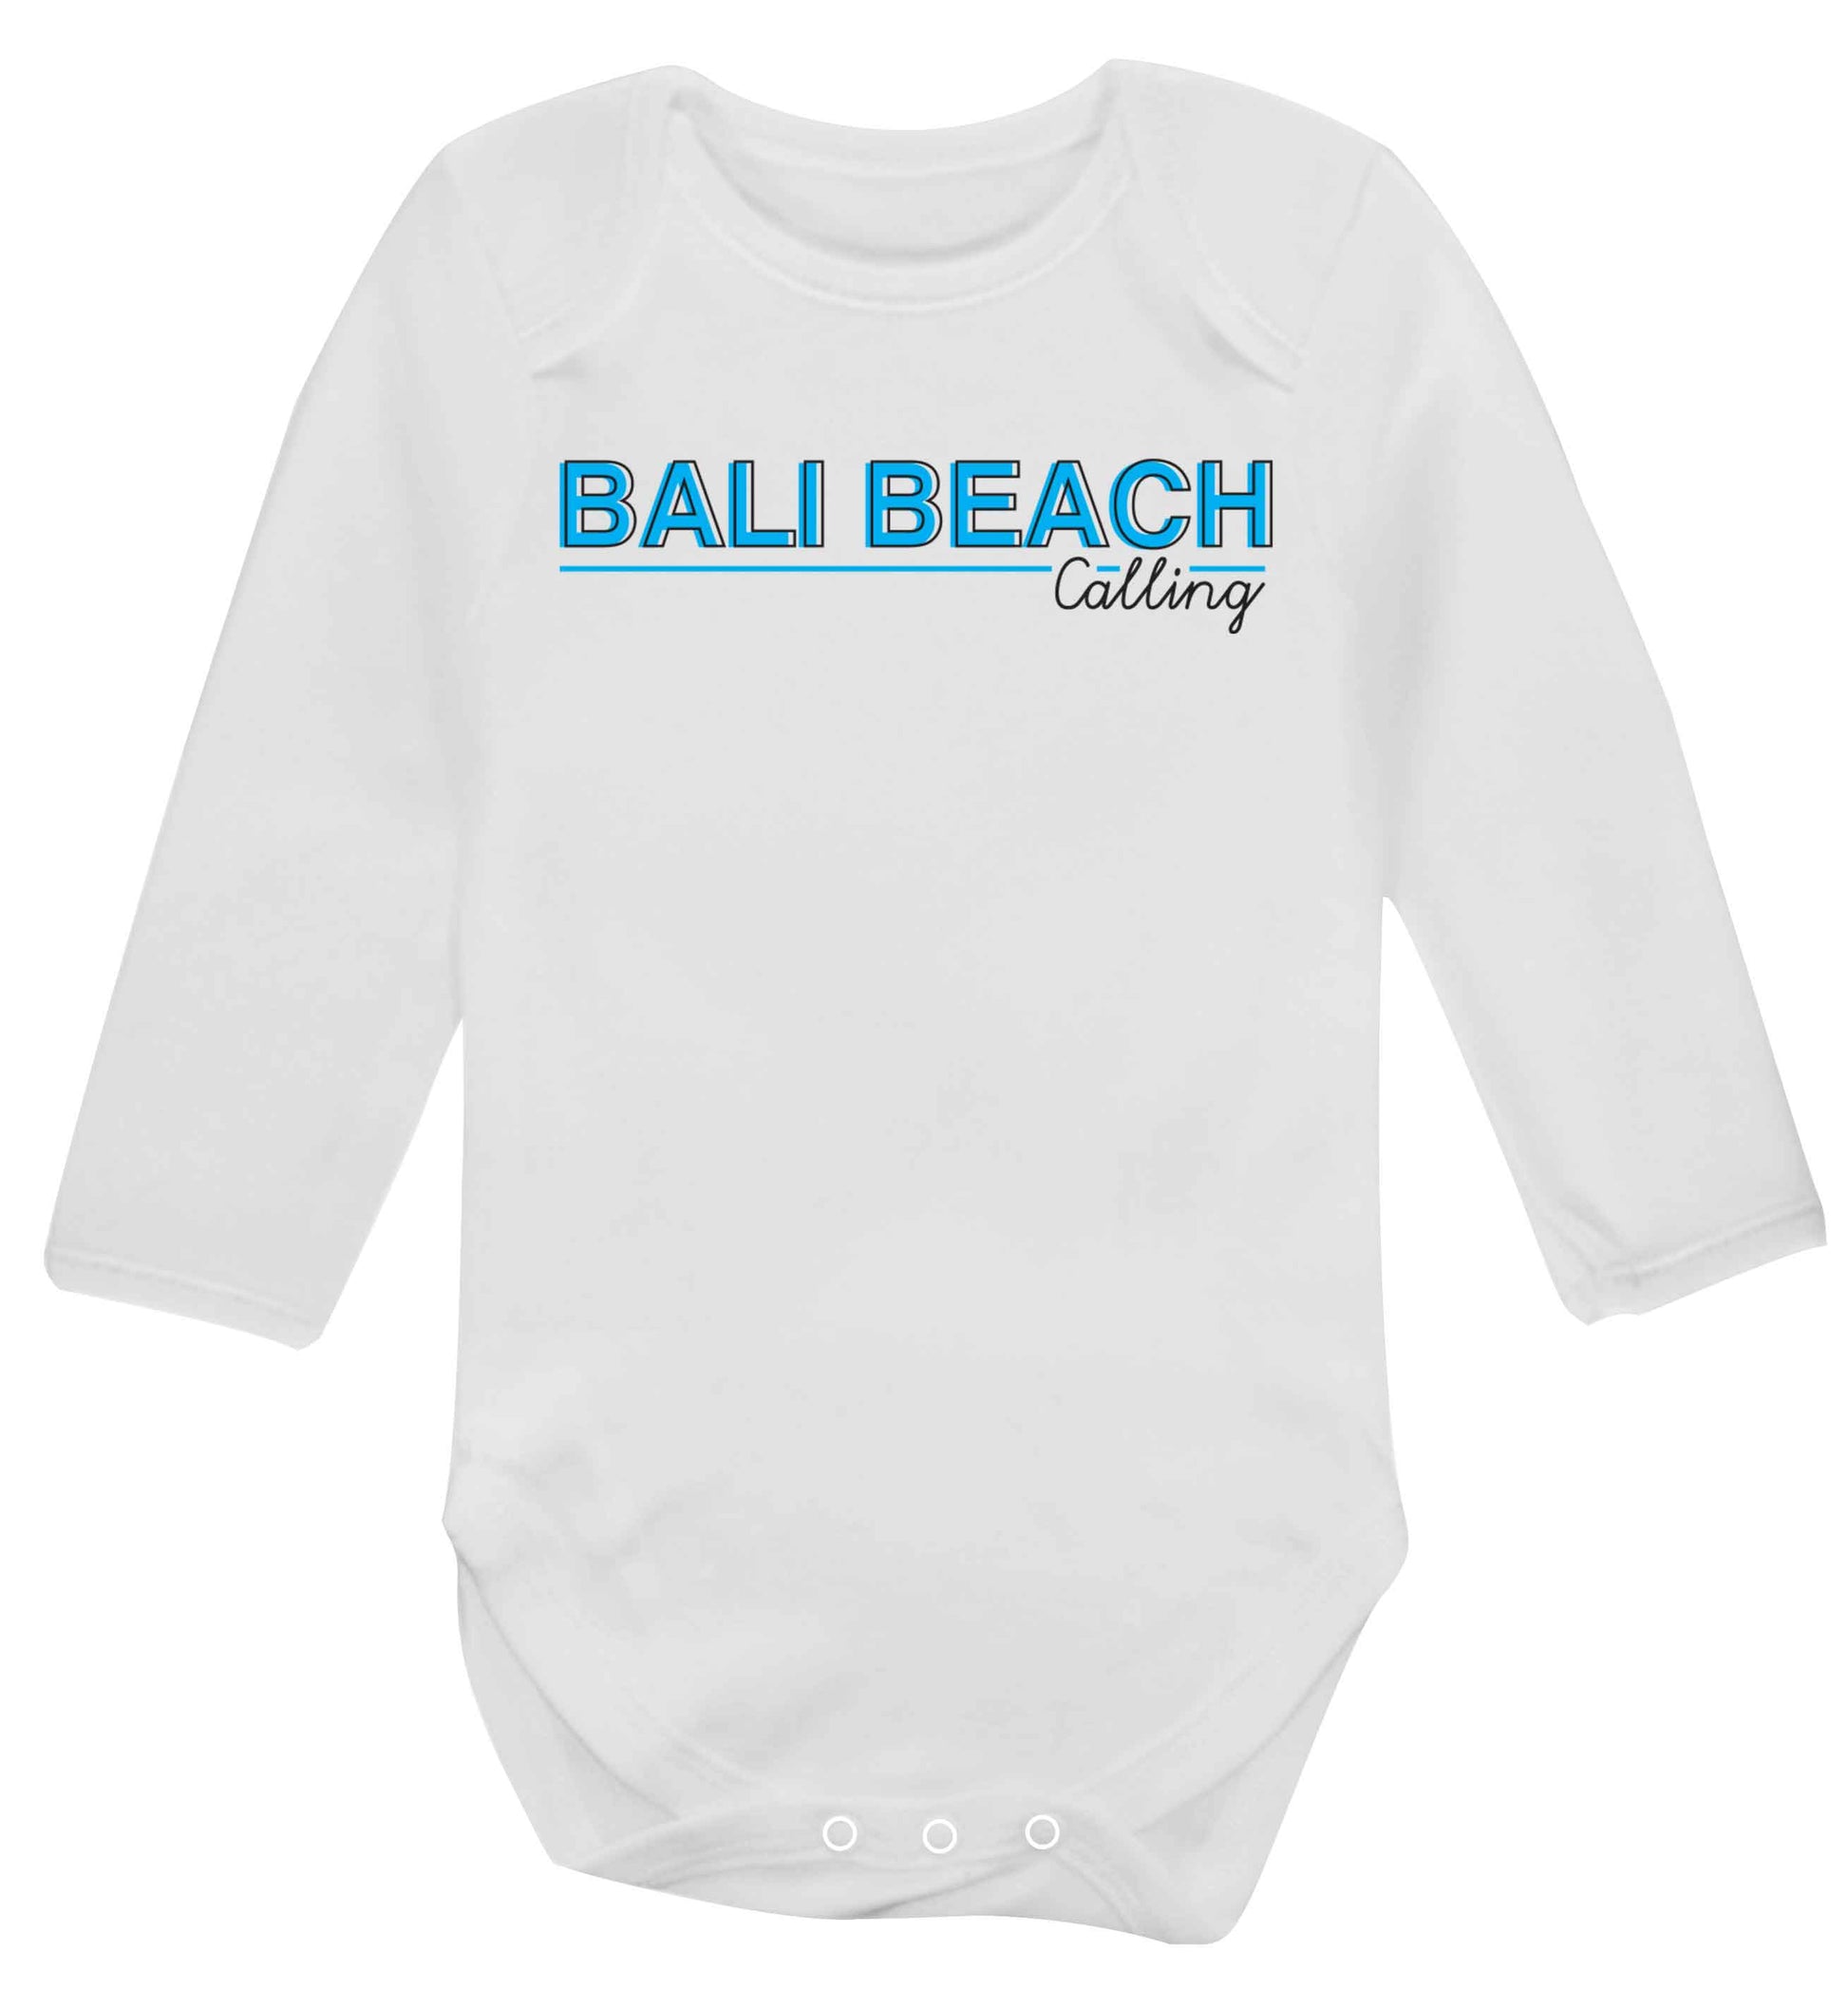 Bali beach calling Baby Vest long sleeved white 6-12 months